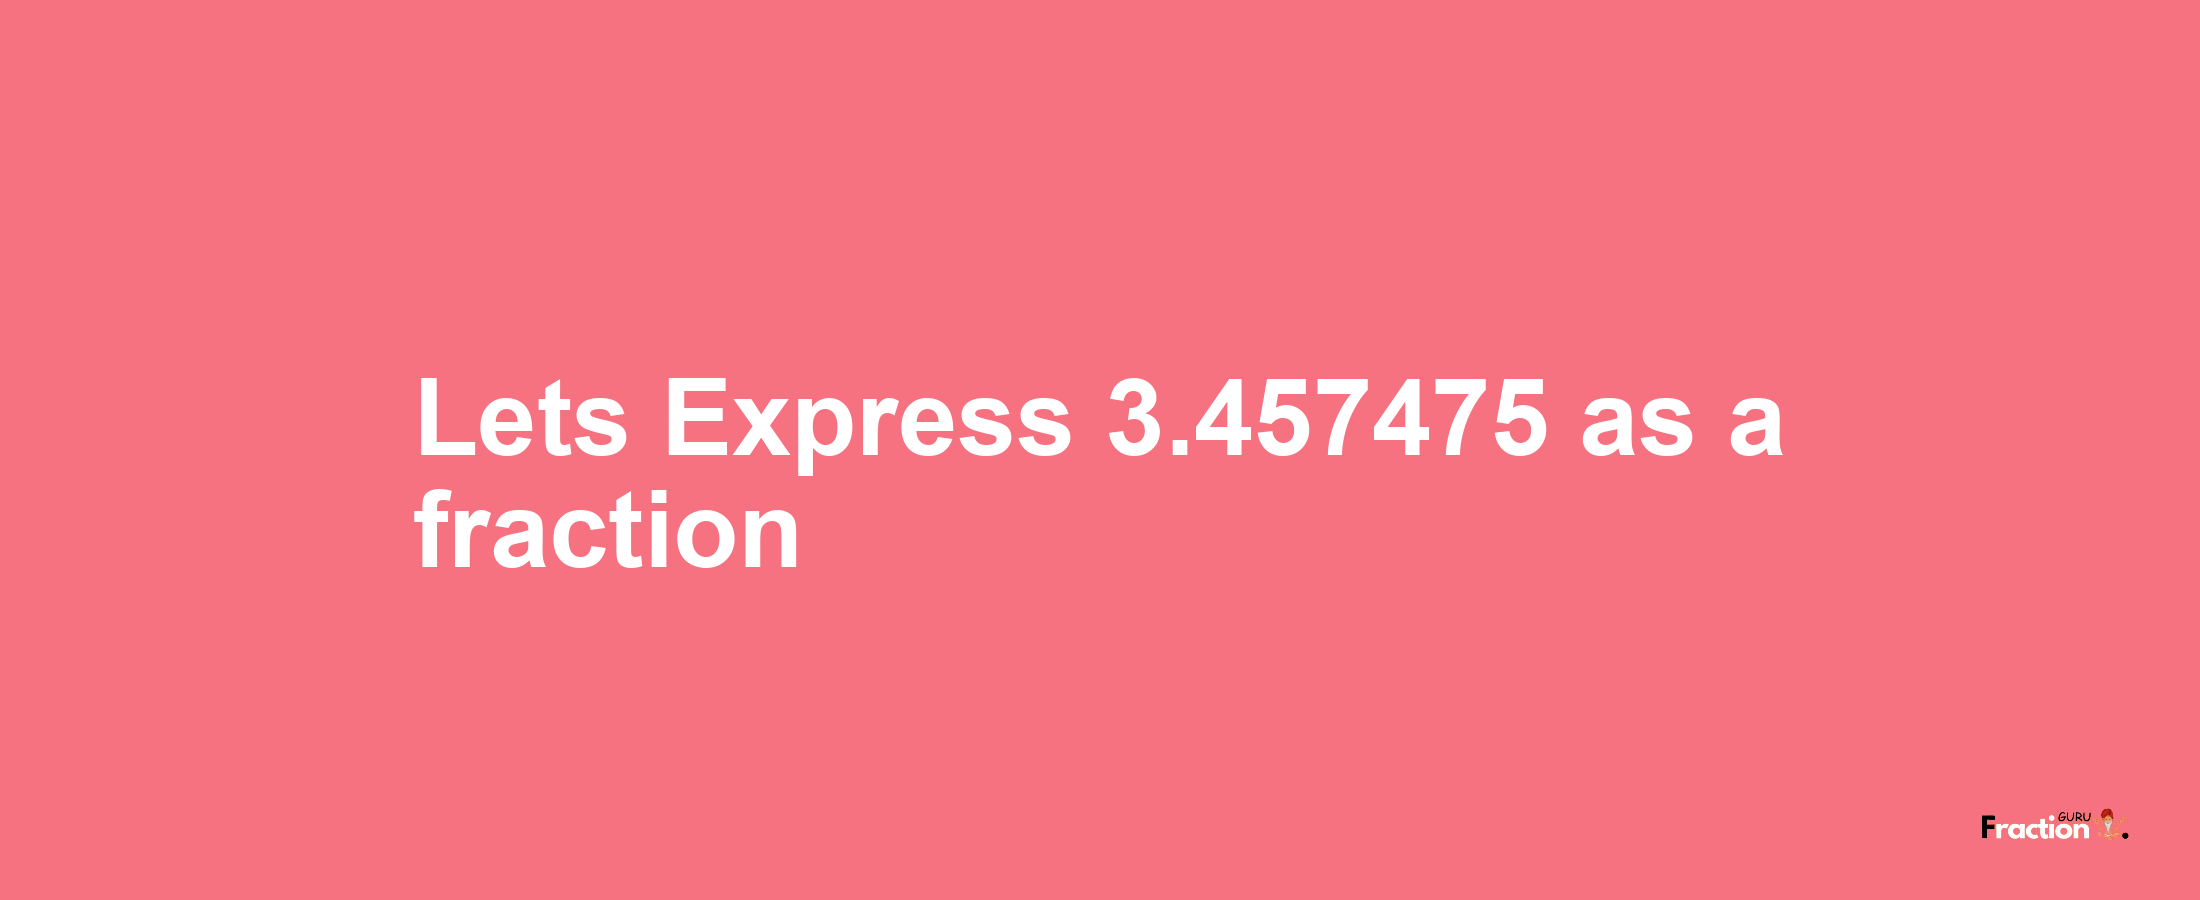 Lets Express 3.457475 as afraction